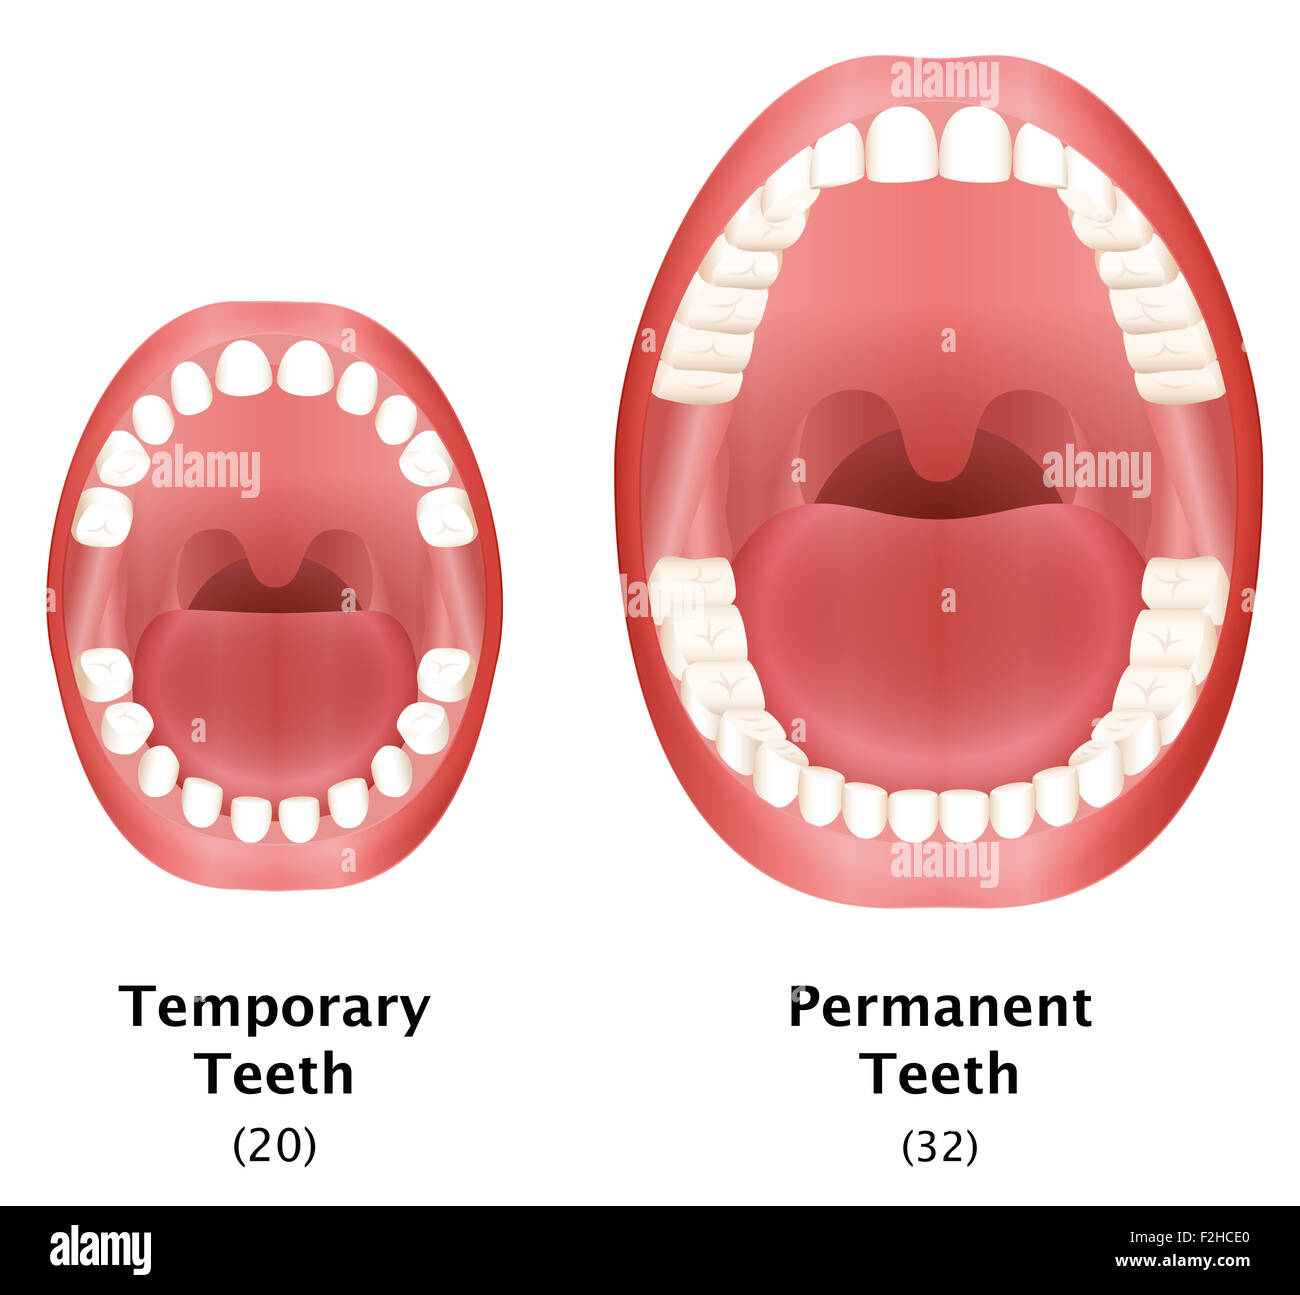 Comparison Of Temporary Teeth Of A Child And Permanent Teeth Of An